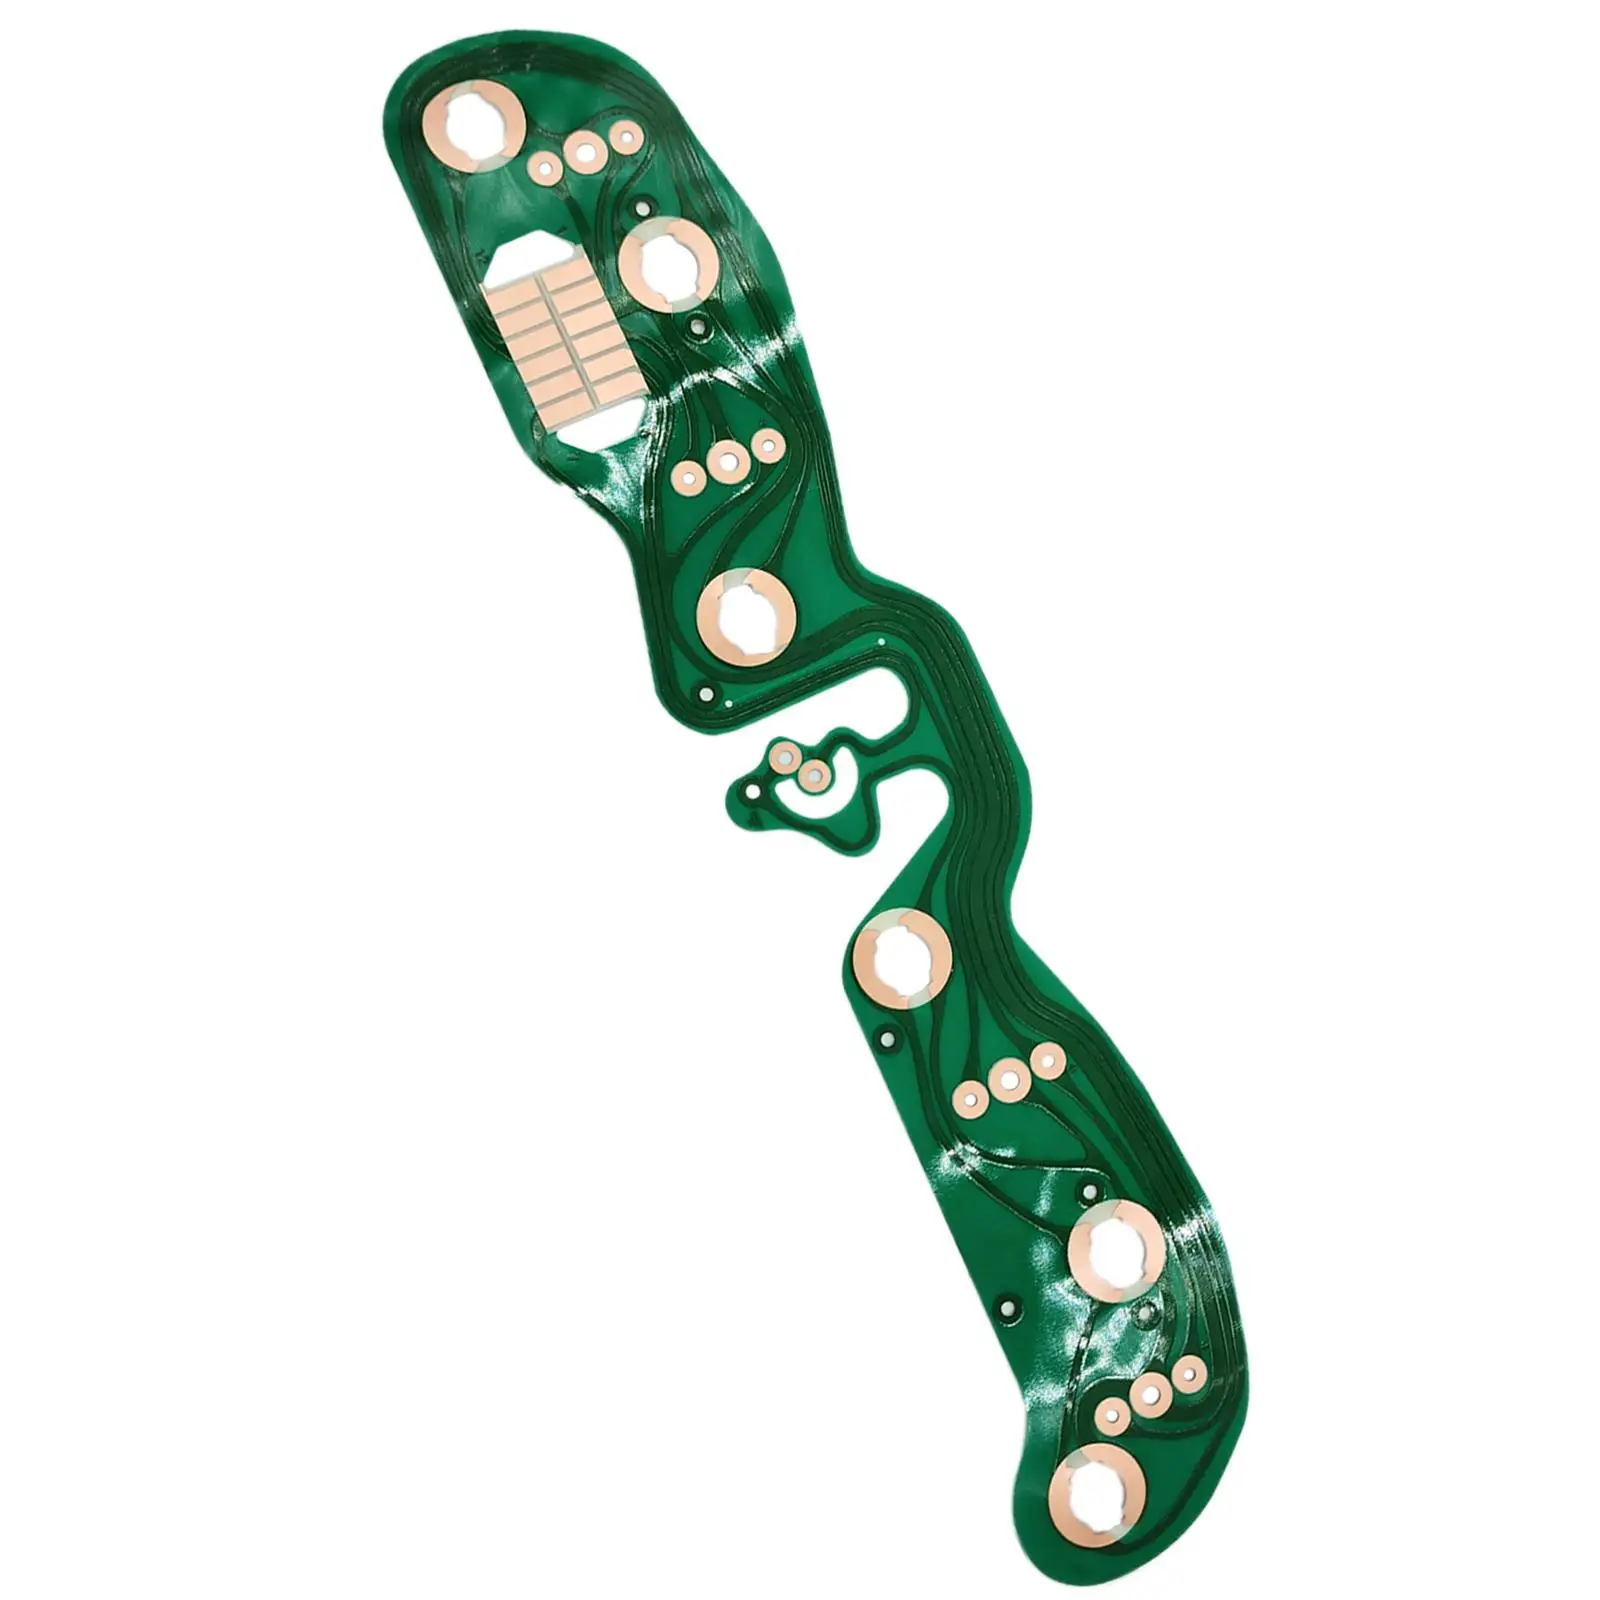 Gauges Printed Circuit Board for Jeep Wrangler easy to install